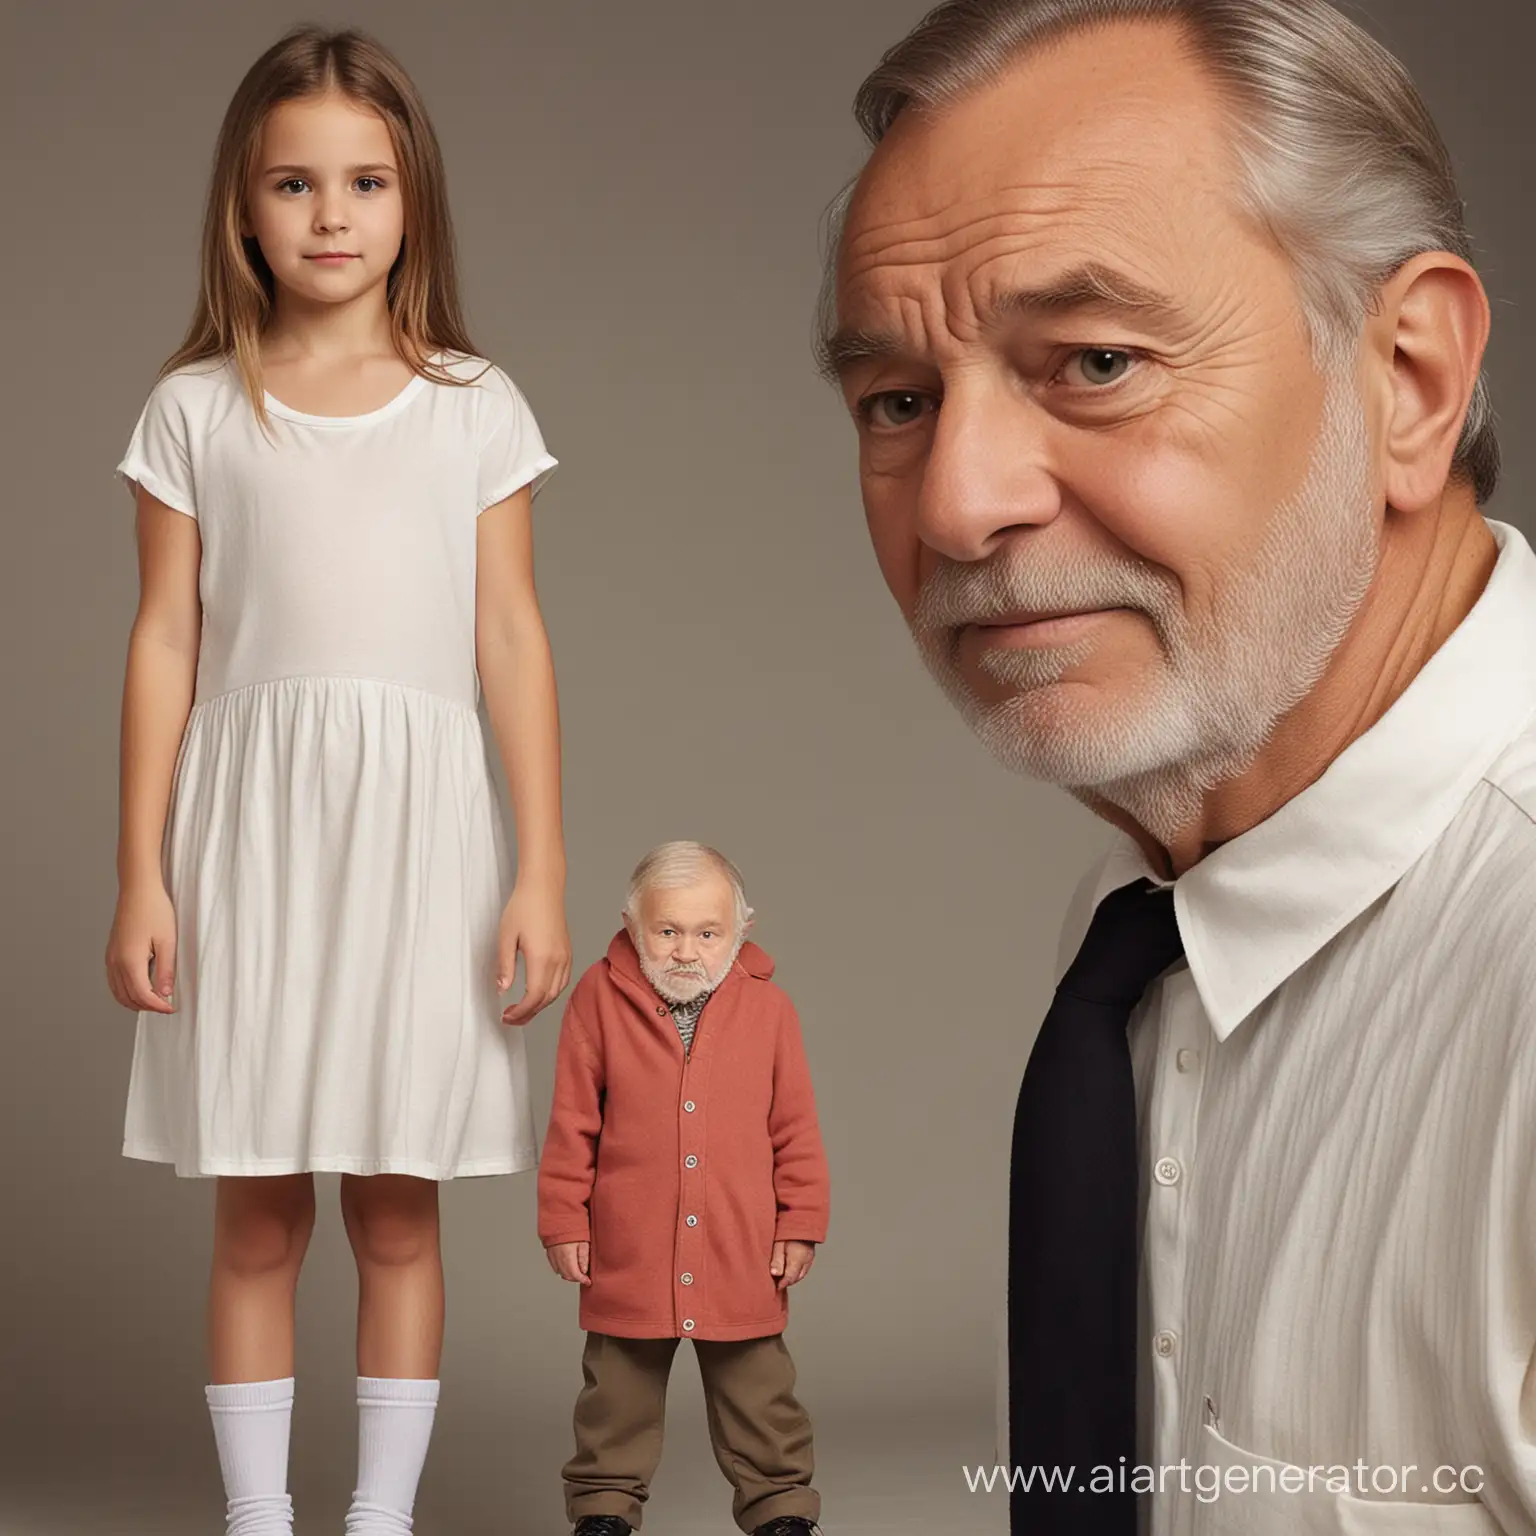 "giant 12yo girl overlooks little old man"  "little old man is intimidated by very tall 12yo girl" 12yo white girl model cute innocent face